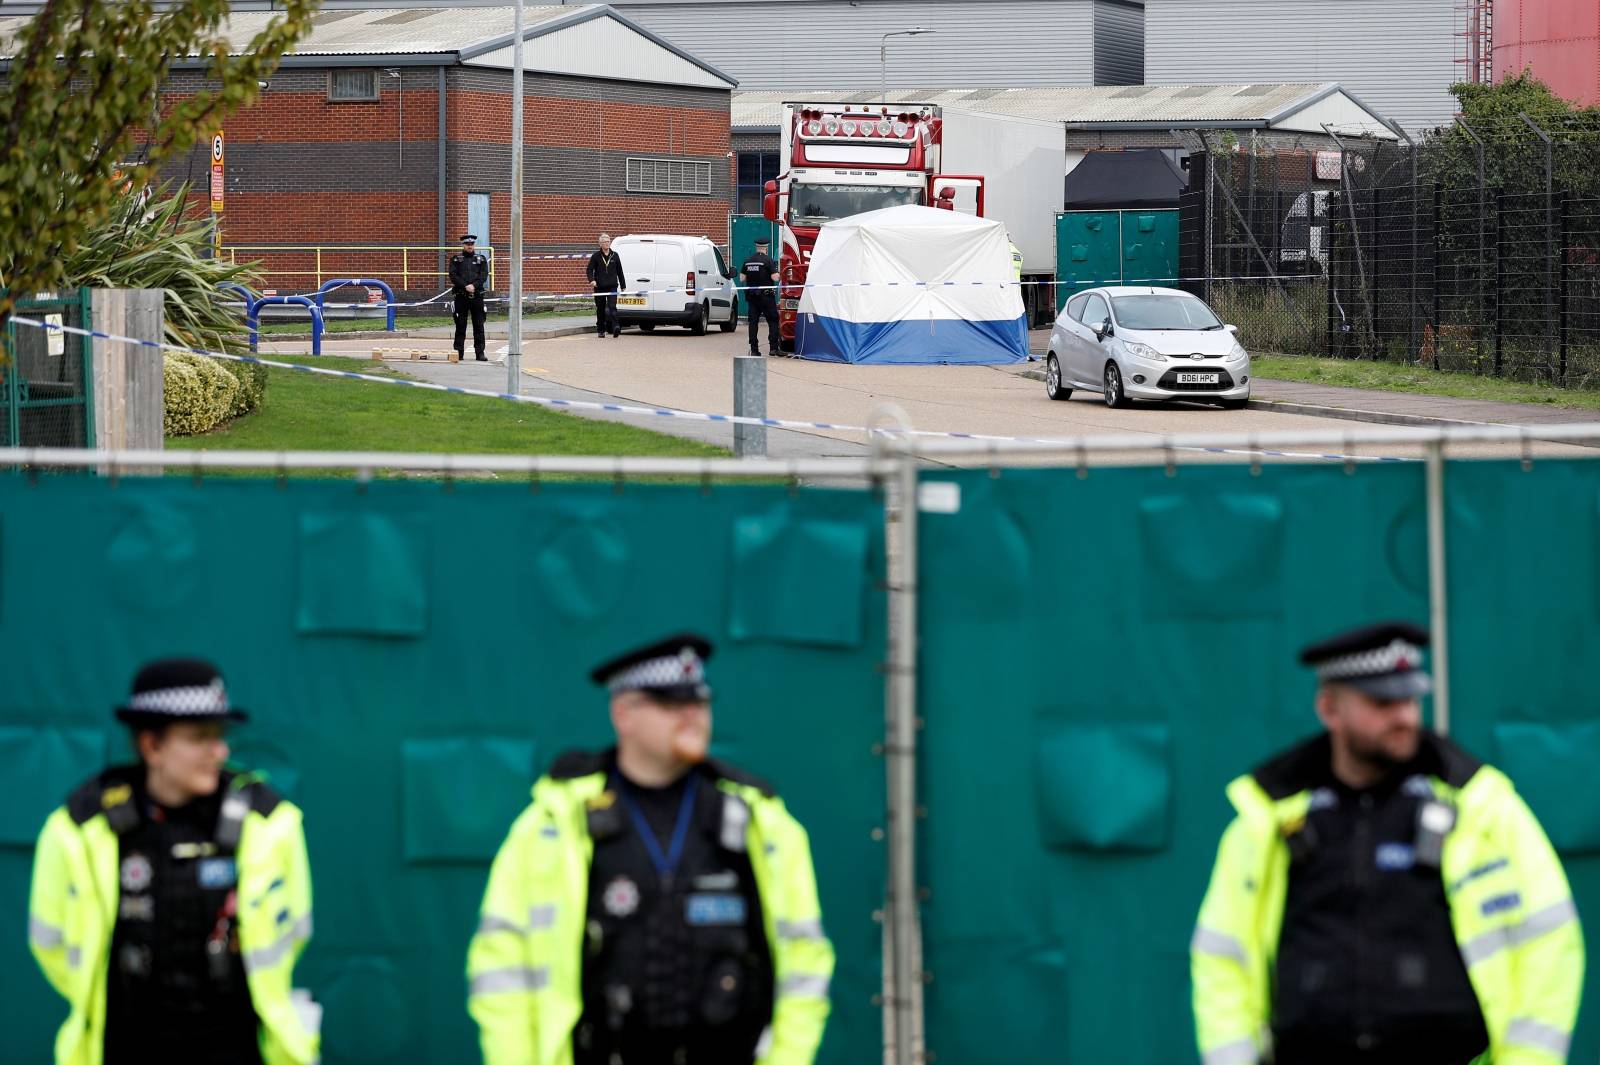 The scene where bodies were discovered in a lorry container, in Grays, Essex